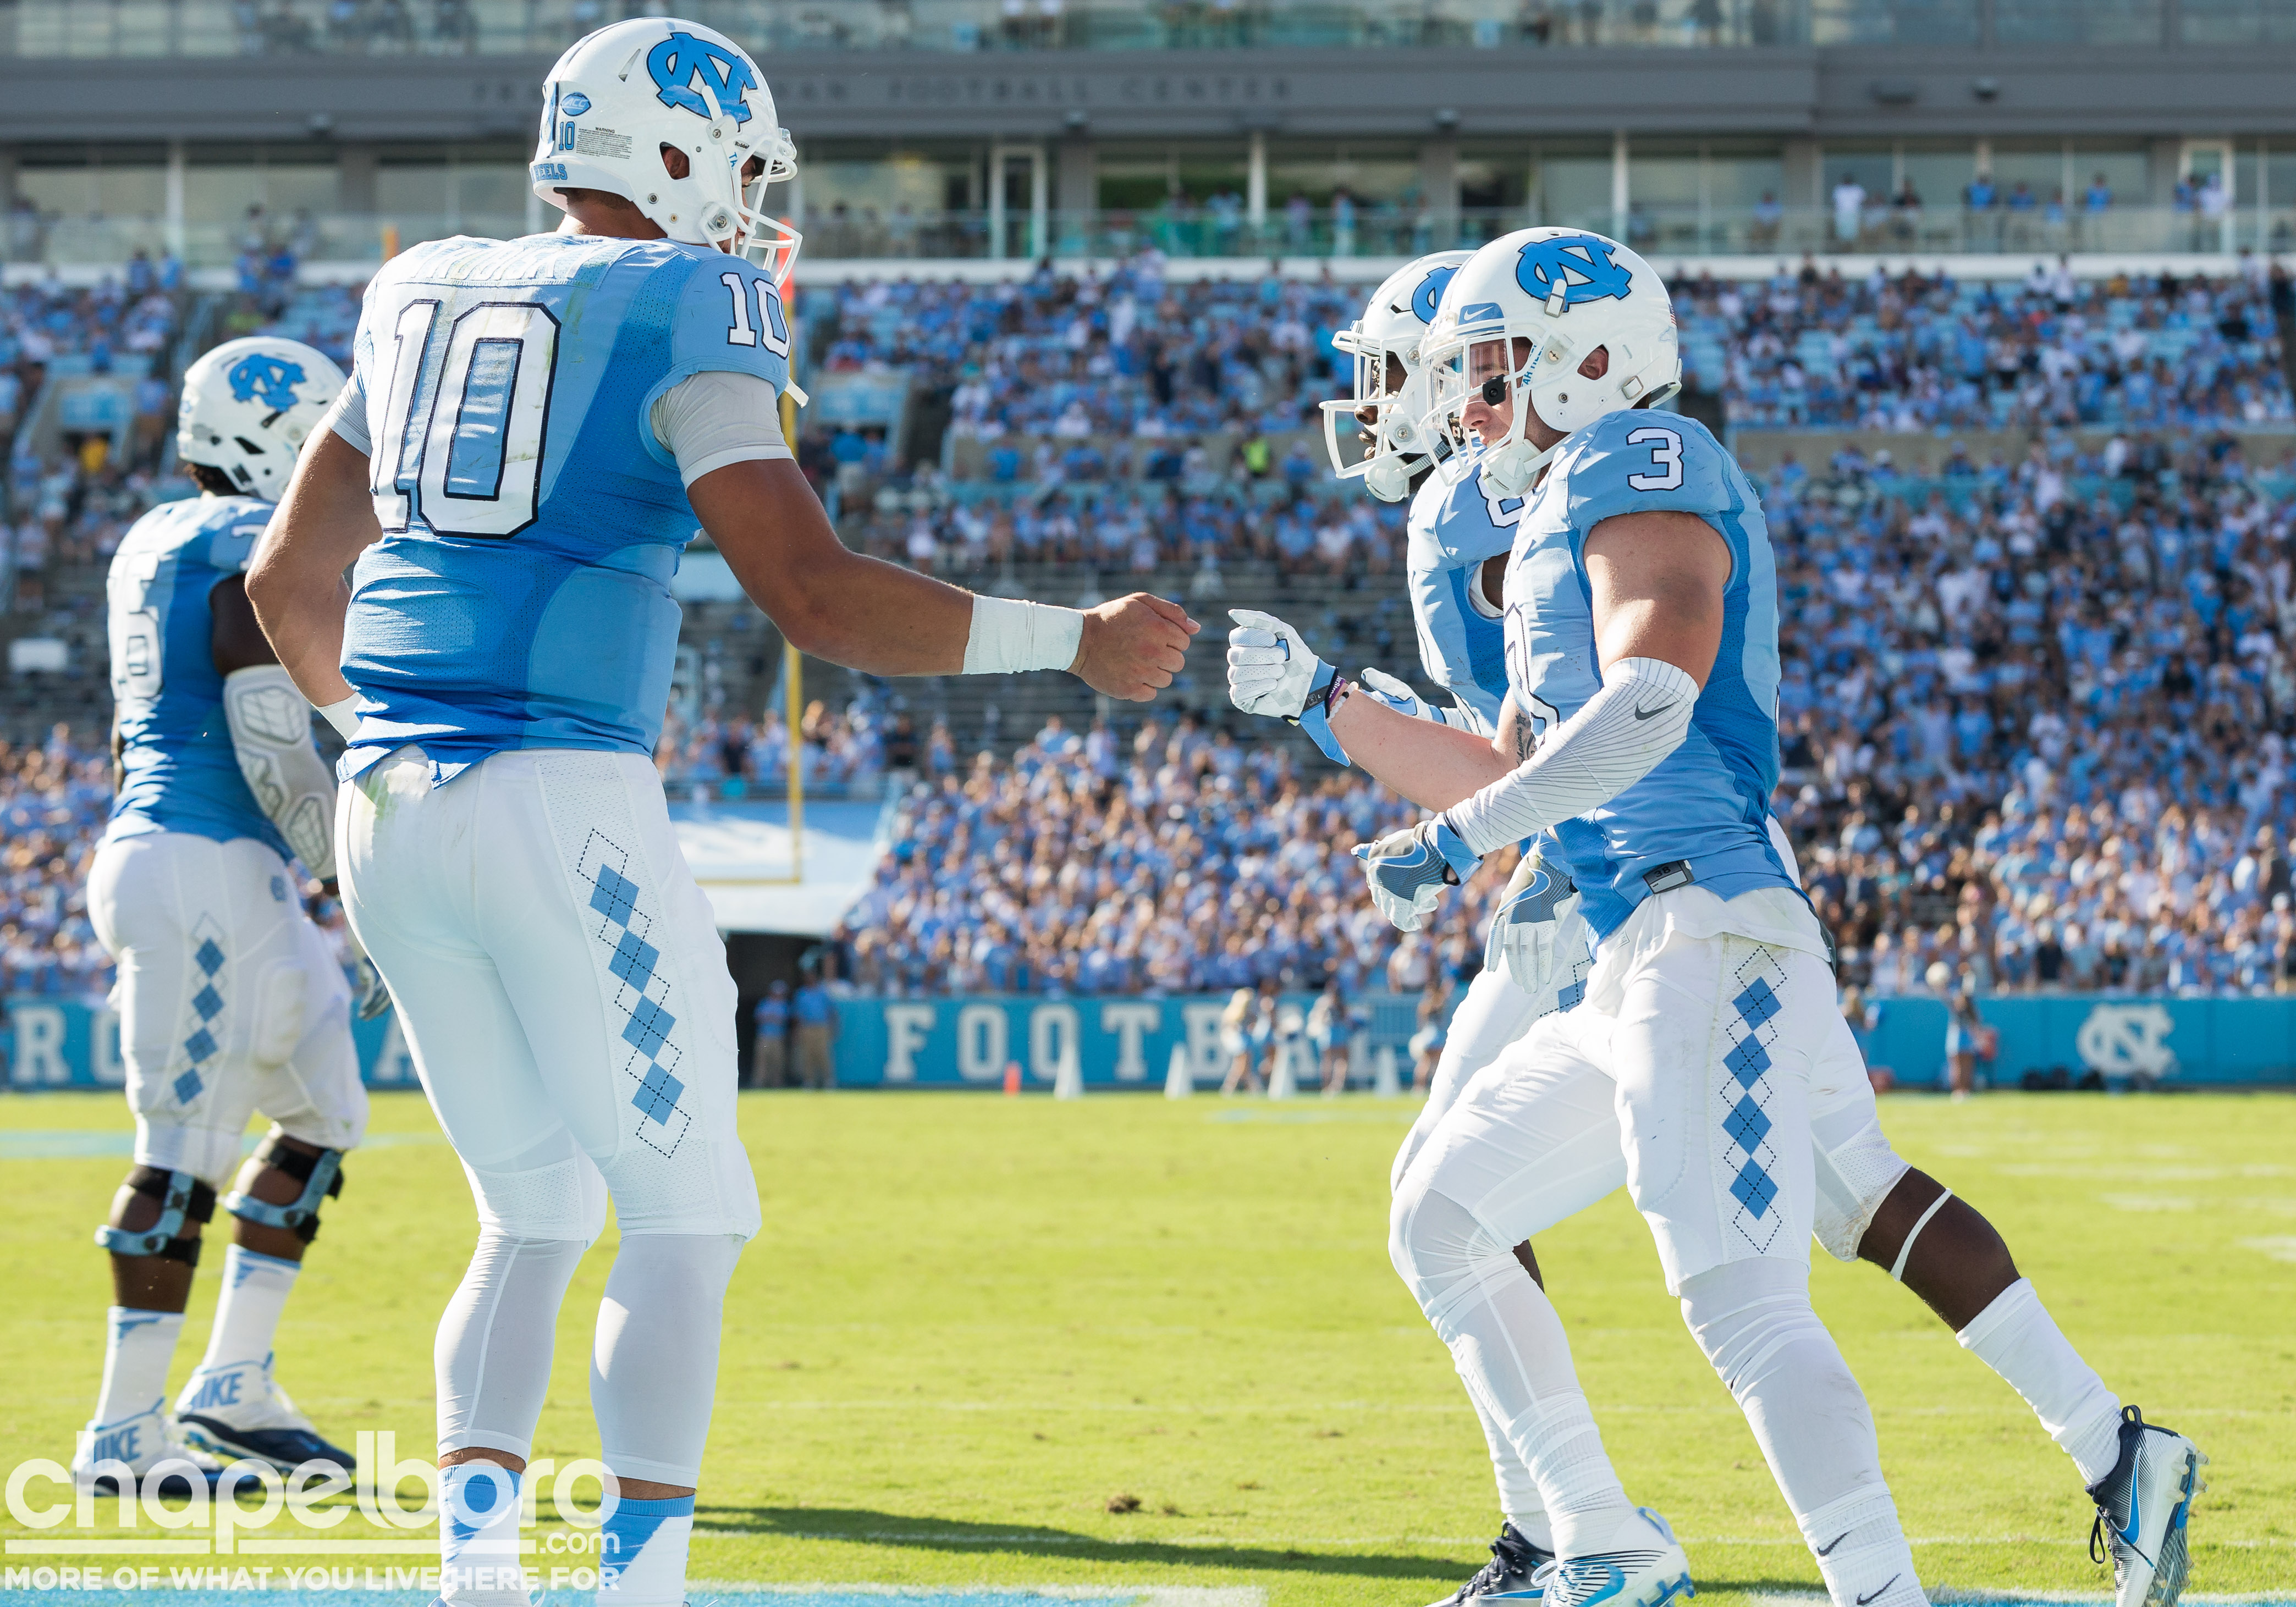 UNC Agrees to Three-Game Football Series vs. App State